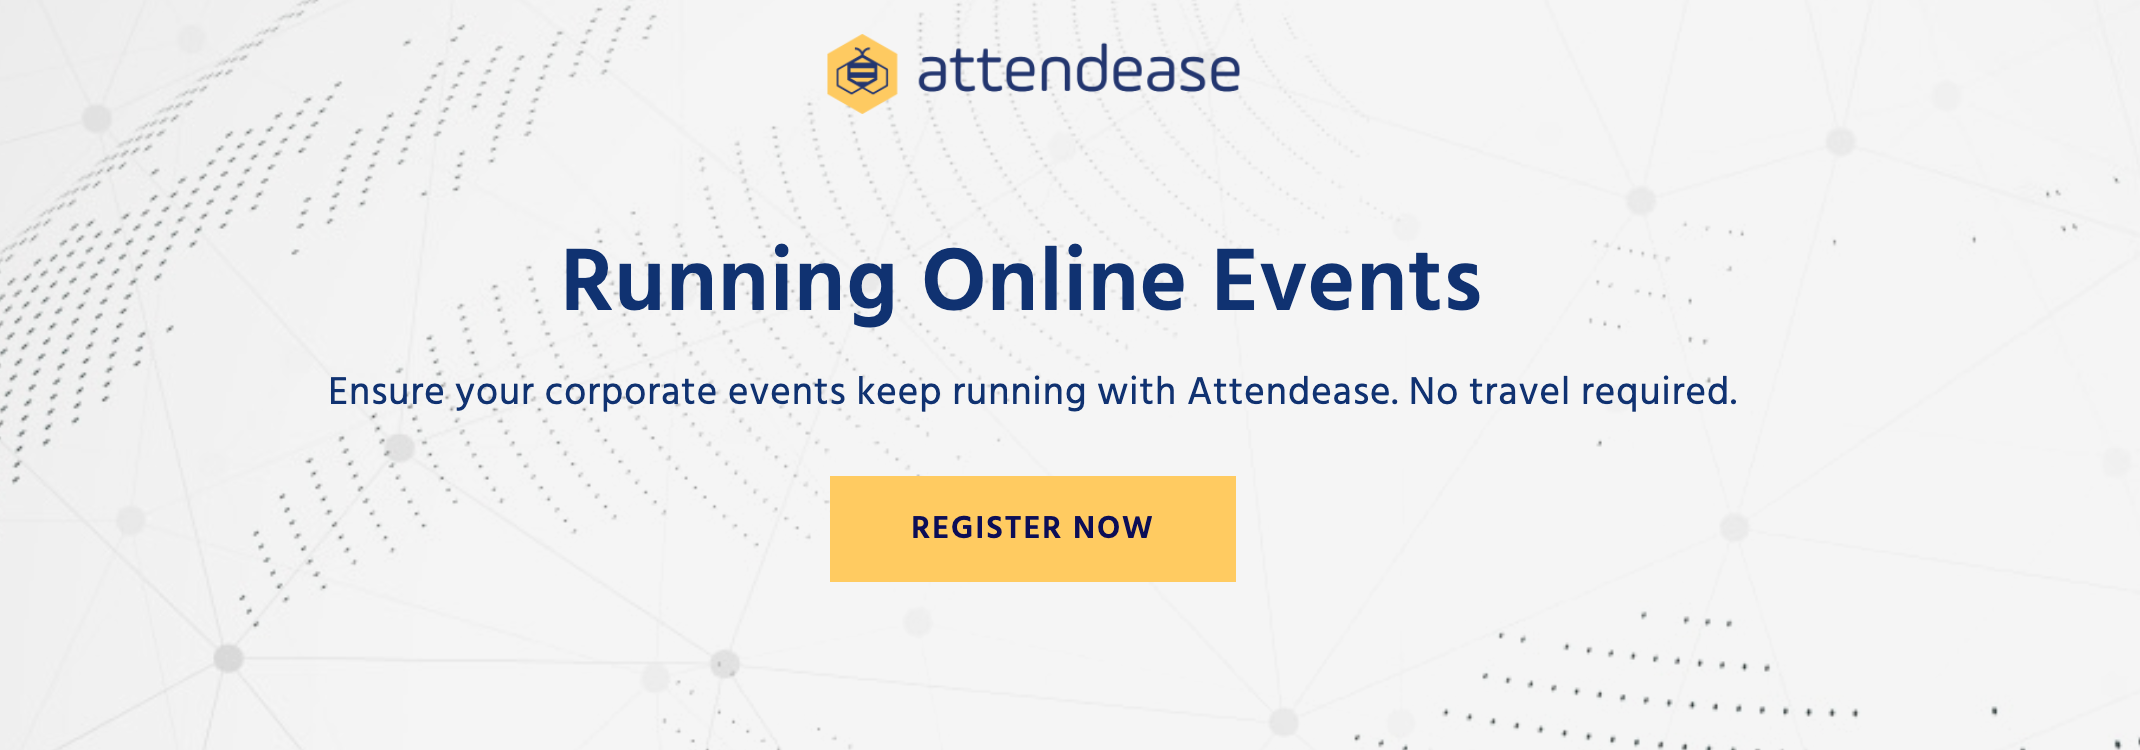 Running Online events with Attendease - Webinar